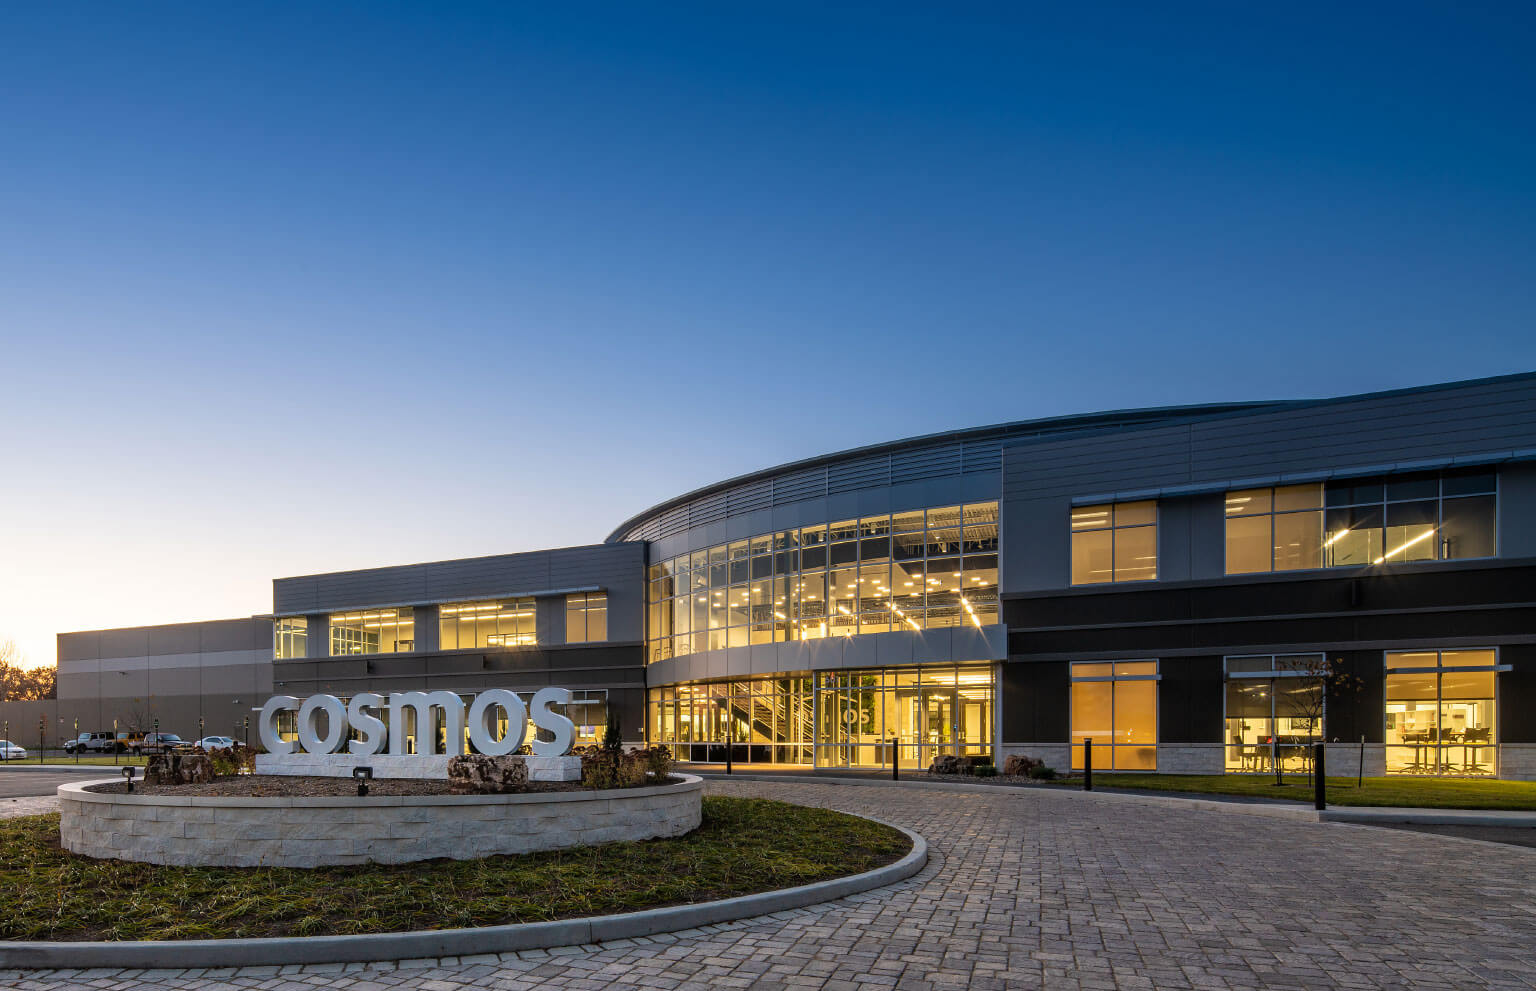 Cosmos Corporations manufacturing facility and corporate office.